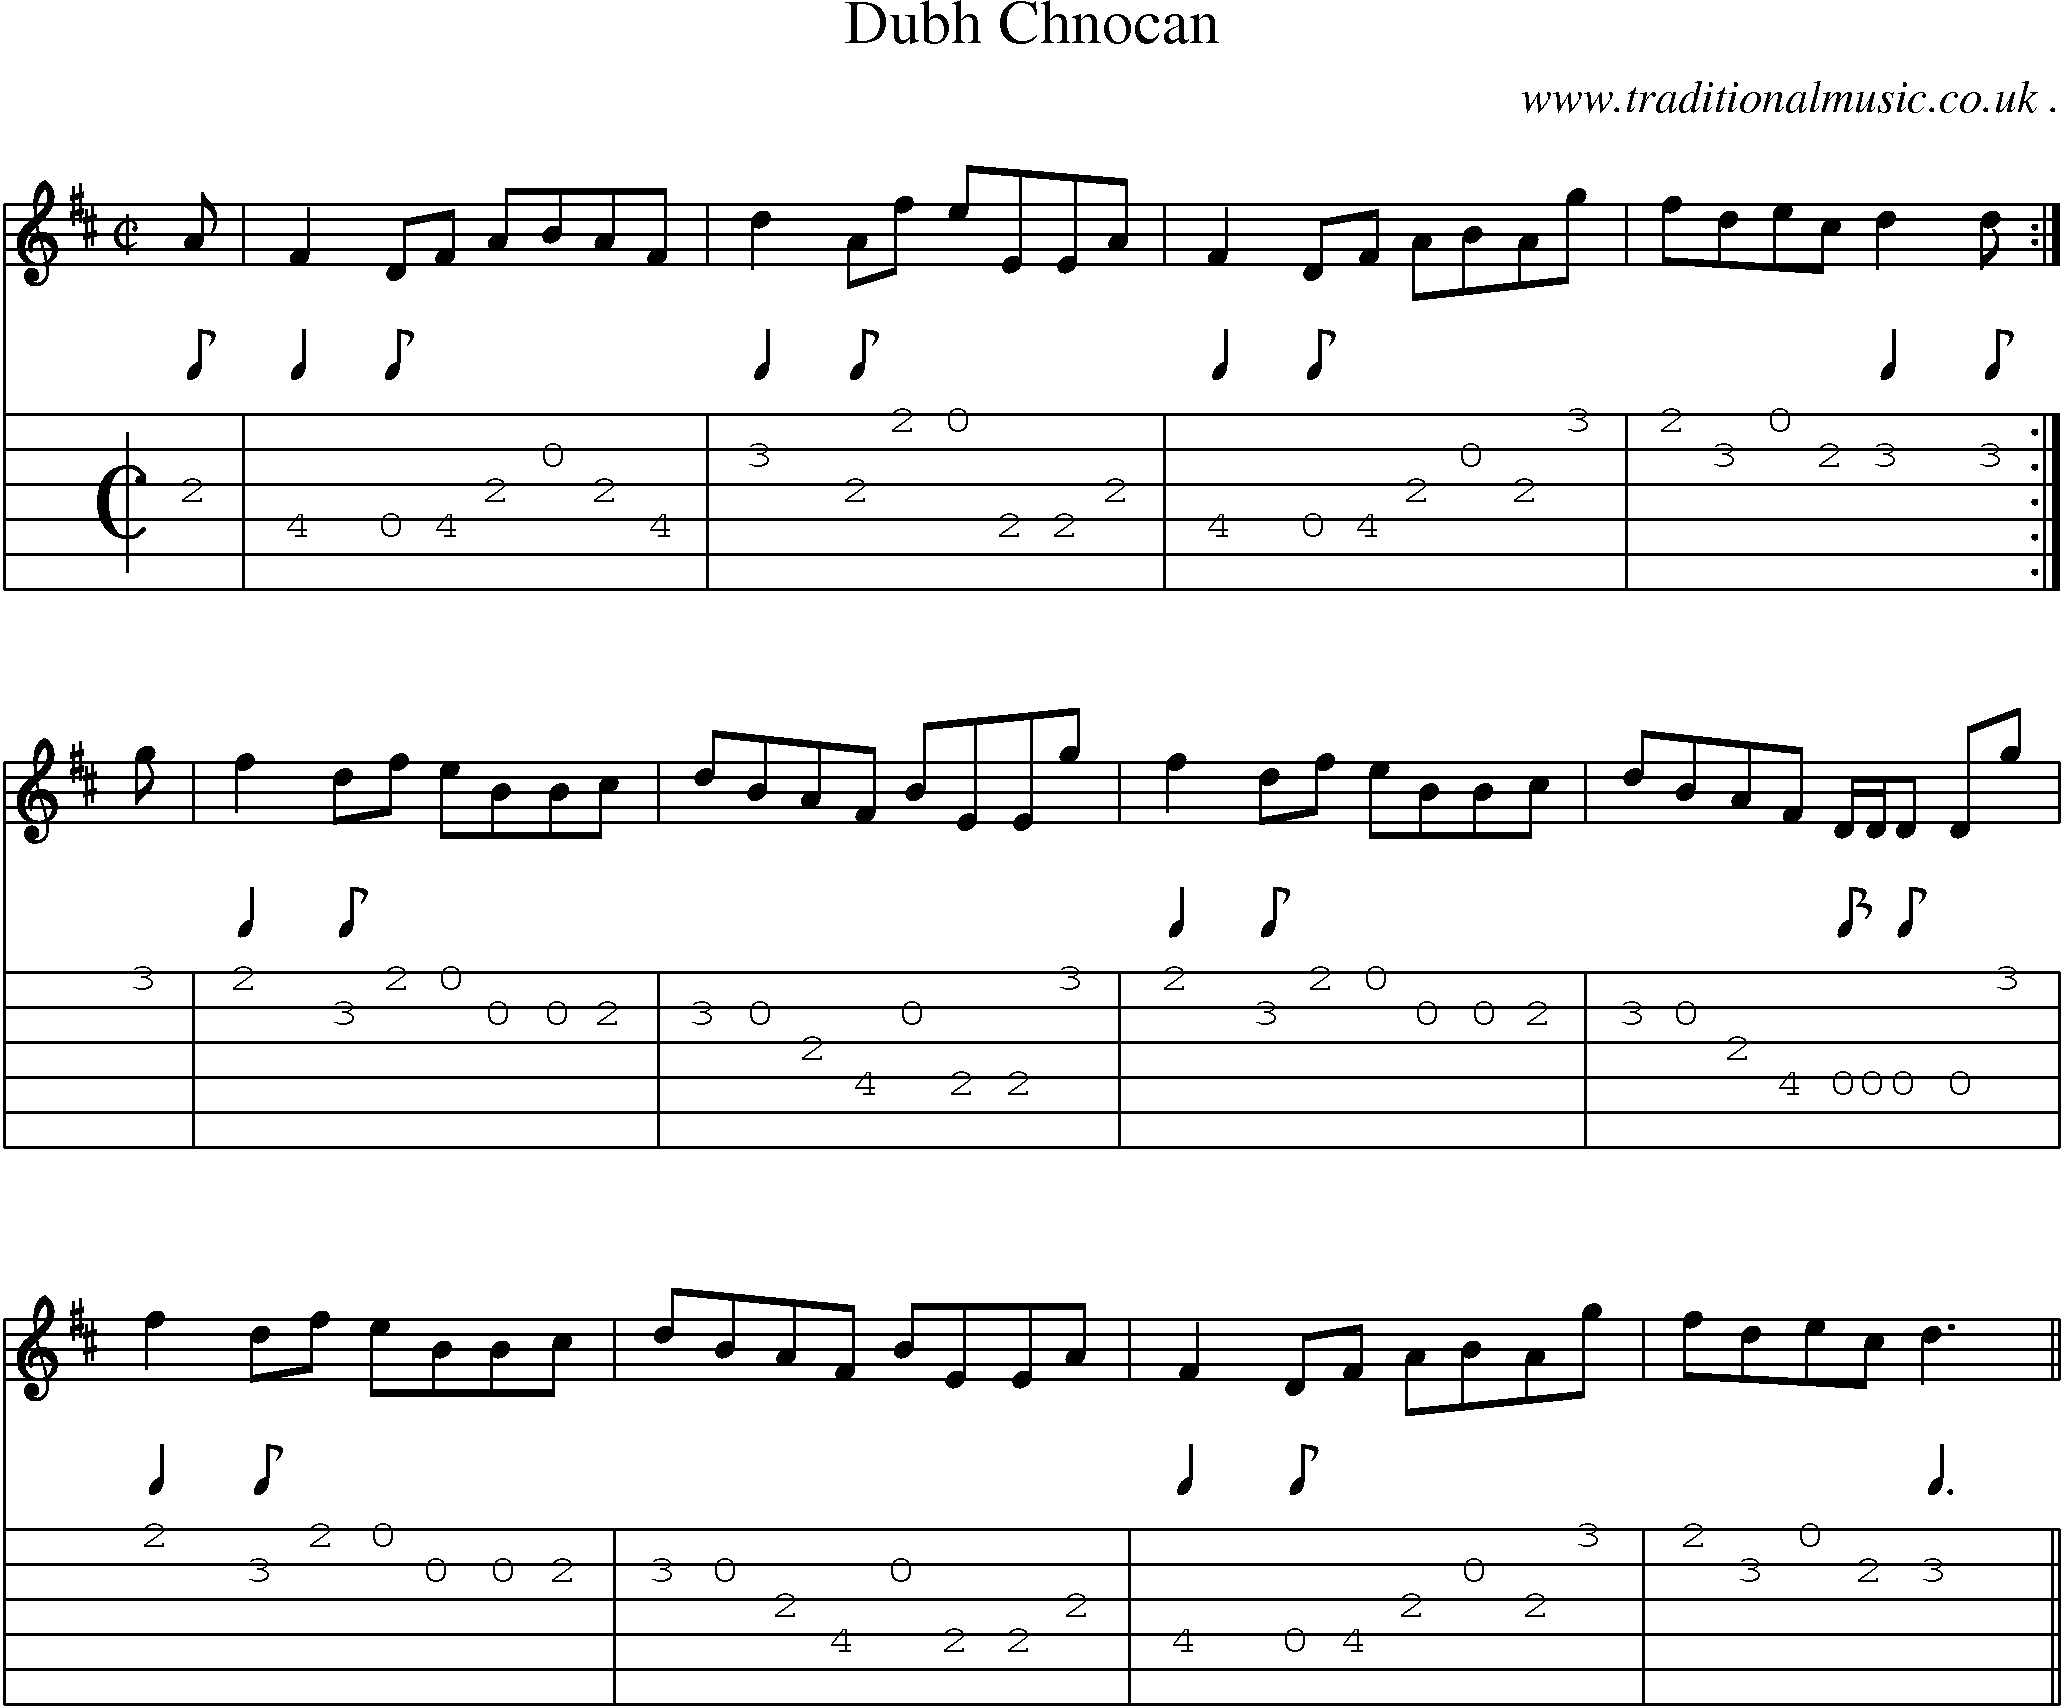 Sheet-music  score, Chords and Guitar Tabs for Dubh Chnocan